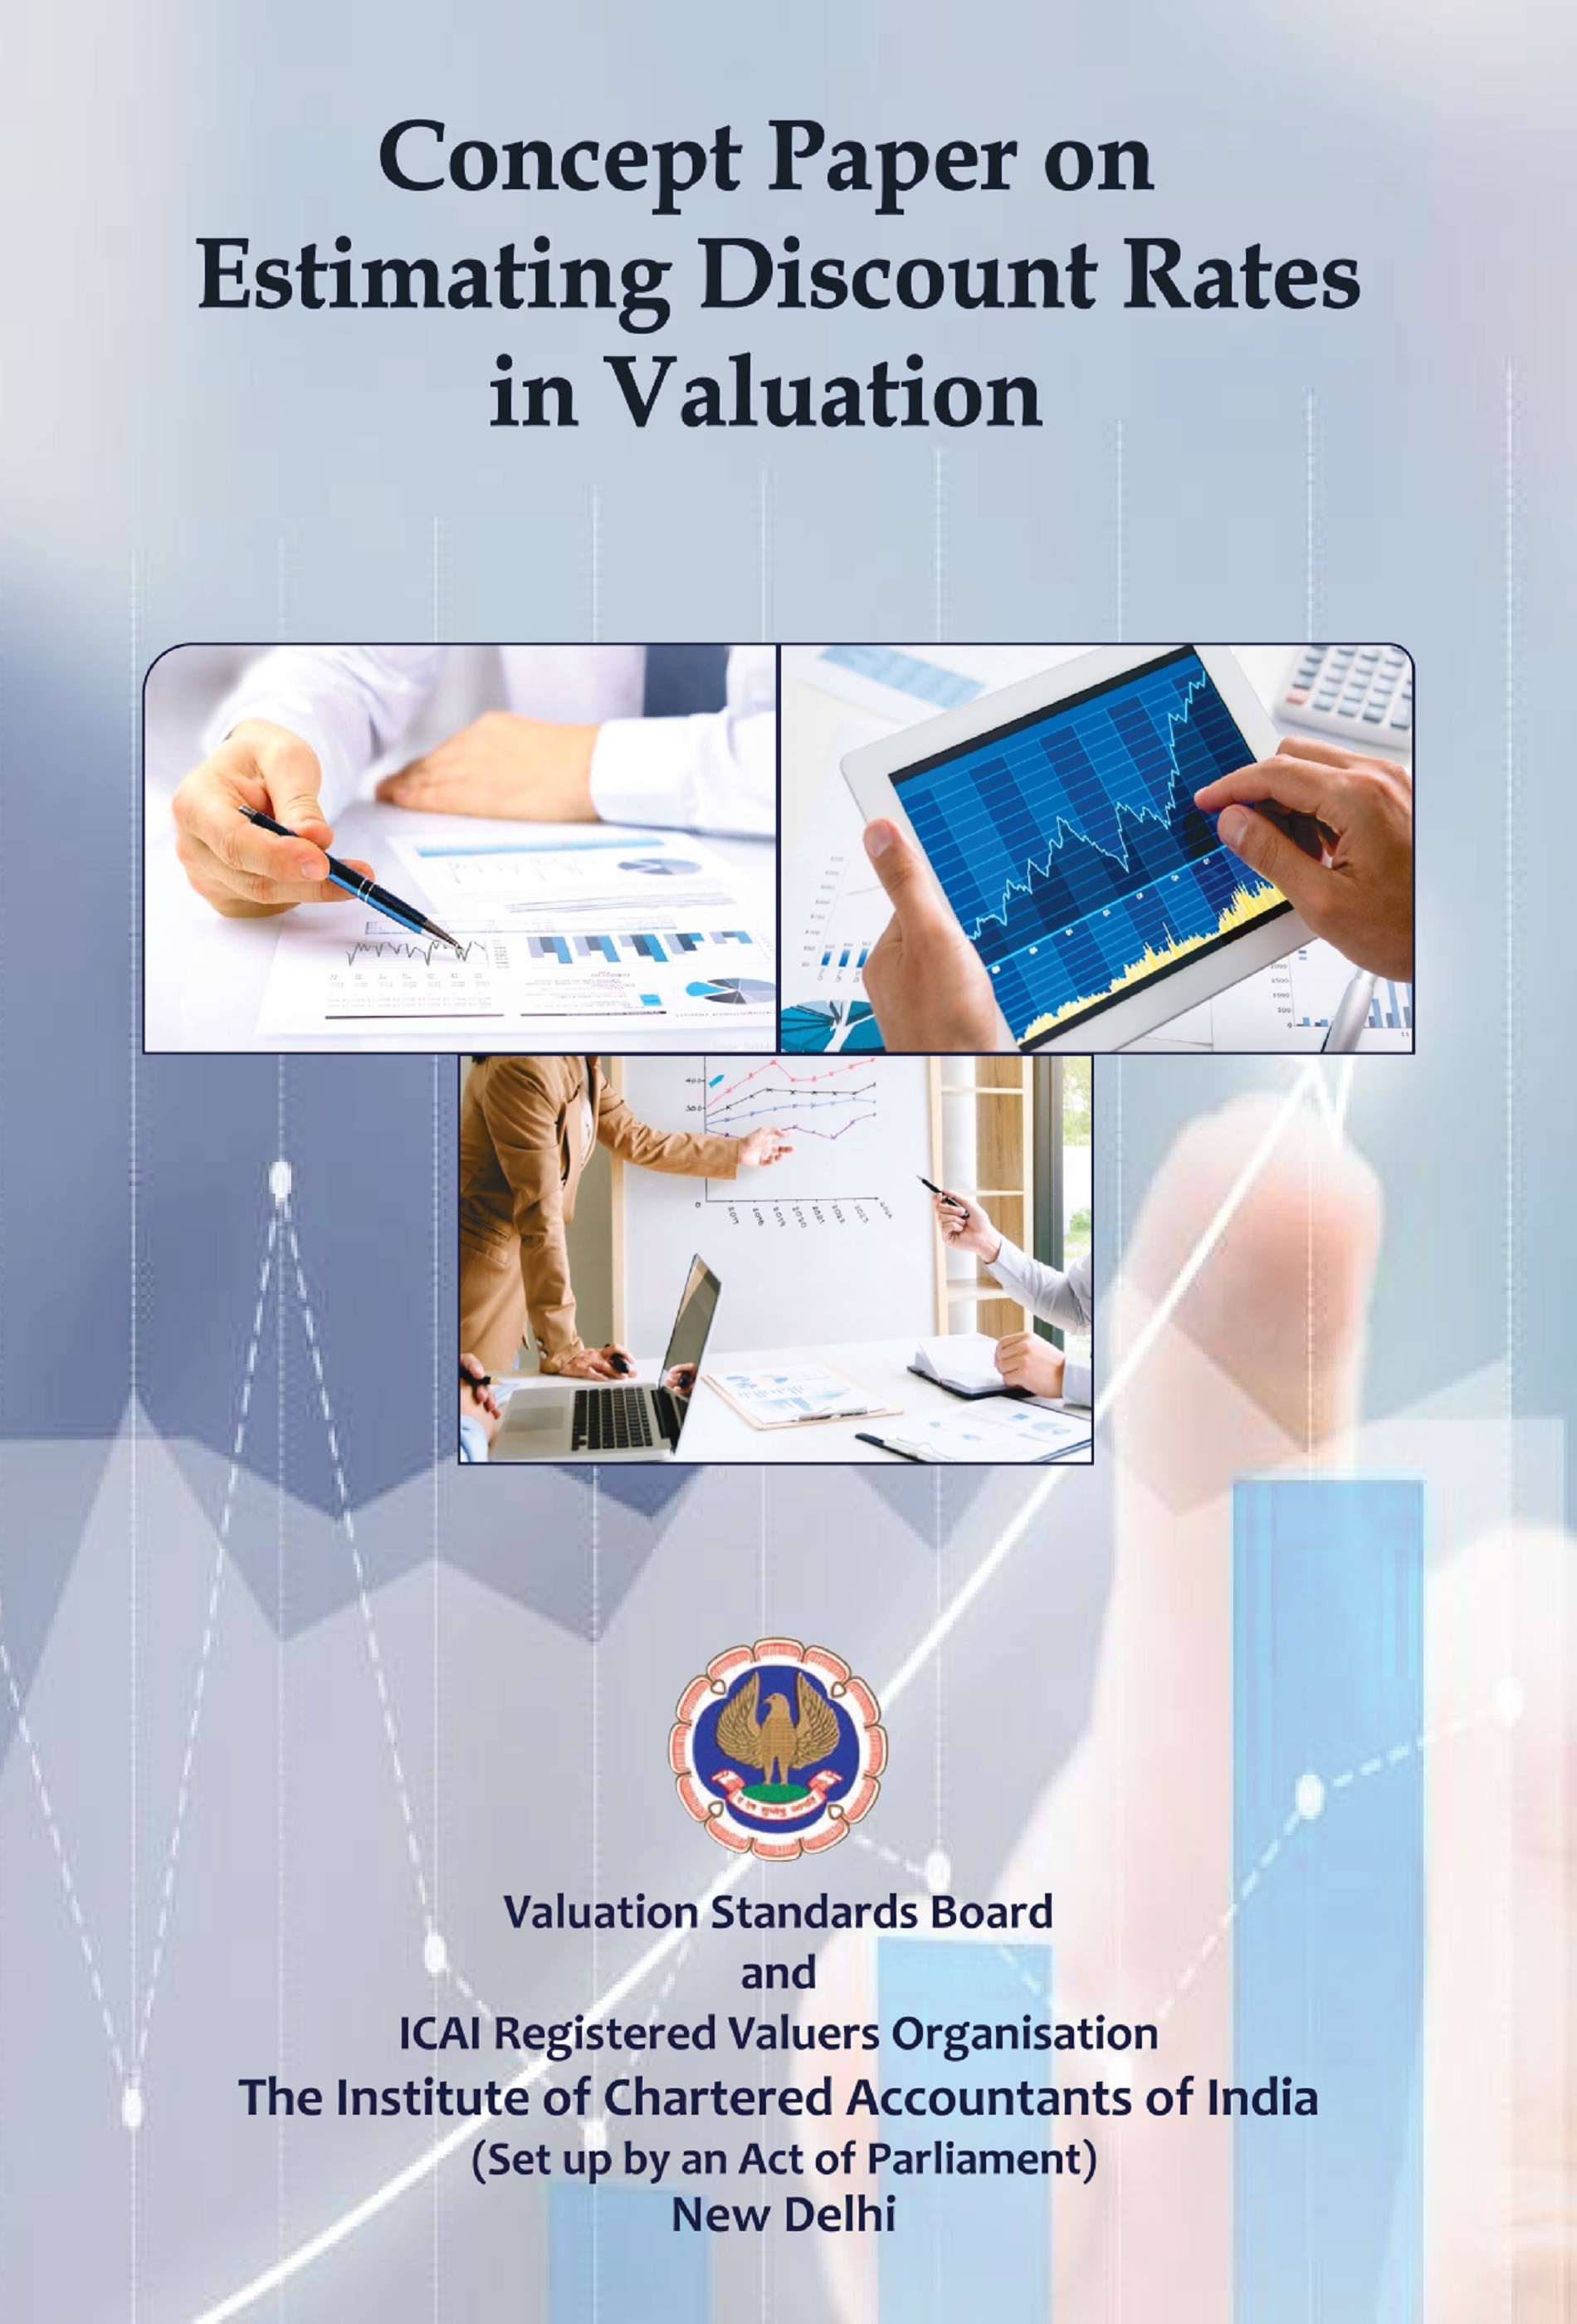 Concept Paper on Estimating Discount Rates in Valuation (February, 2022)